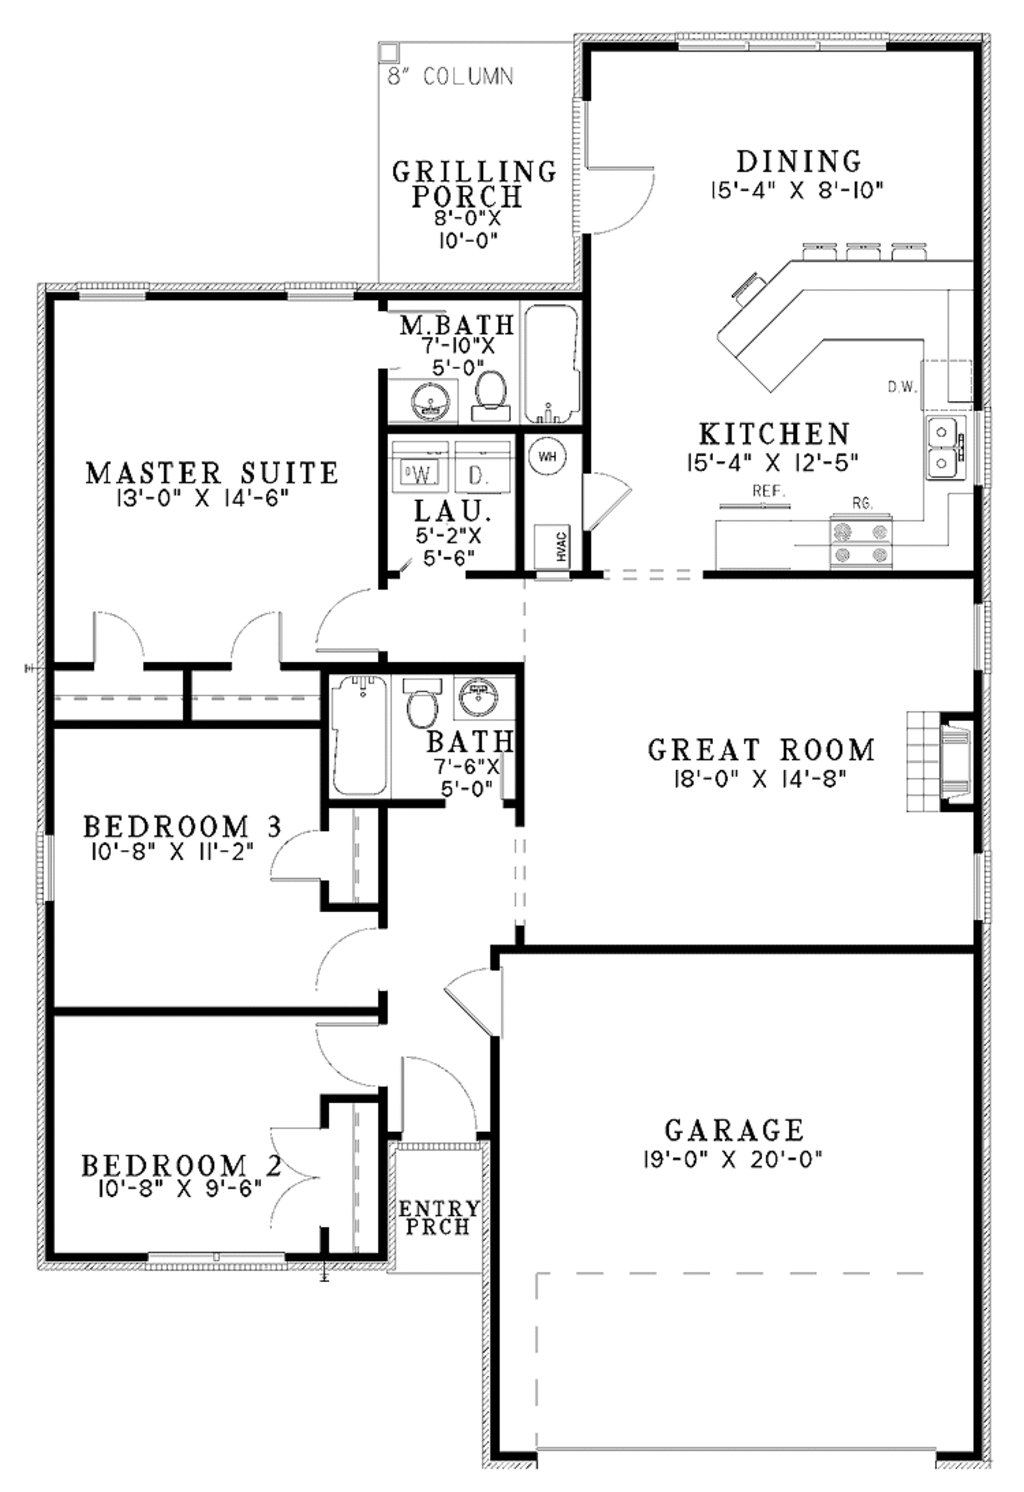 ranch-style-house-plan-3-beds-2-baths-1356-sq-ft-plan-17-2810